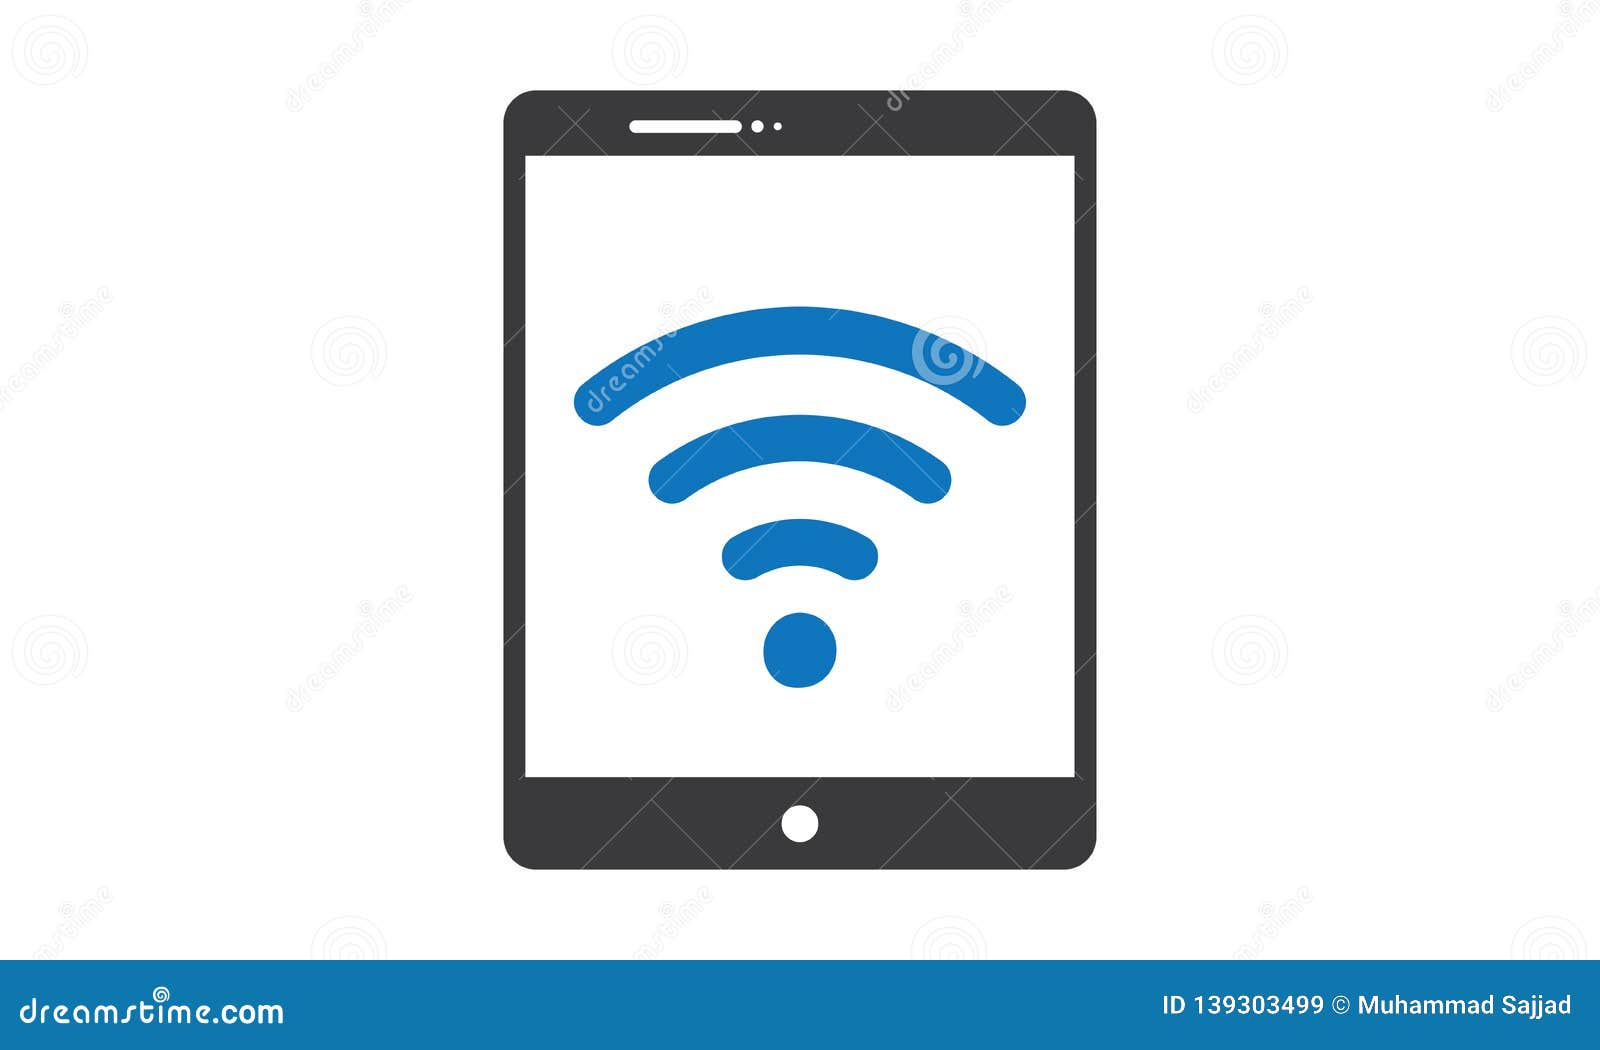 Ipad and WiFi Symbol. Tablet with WiFi . Wireless and Ipad Stock Vector